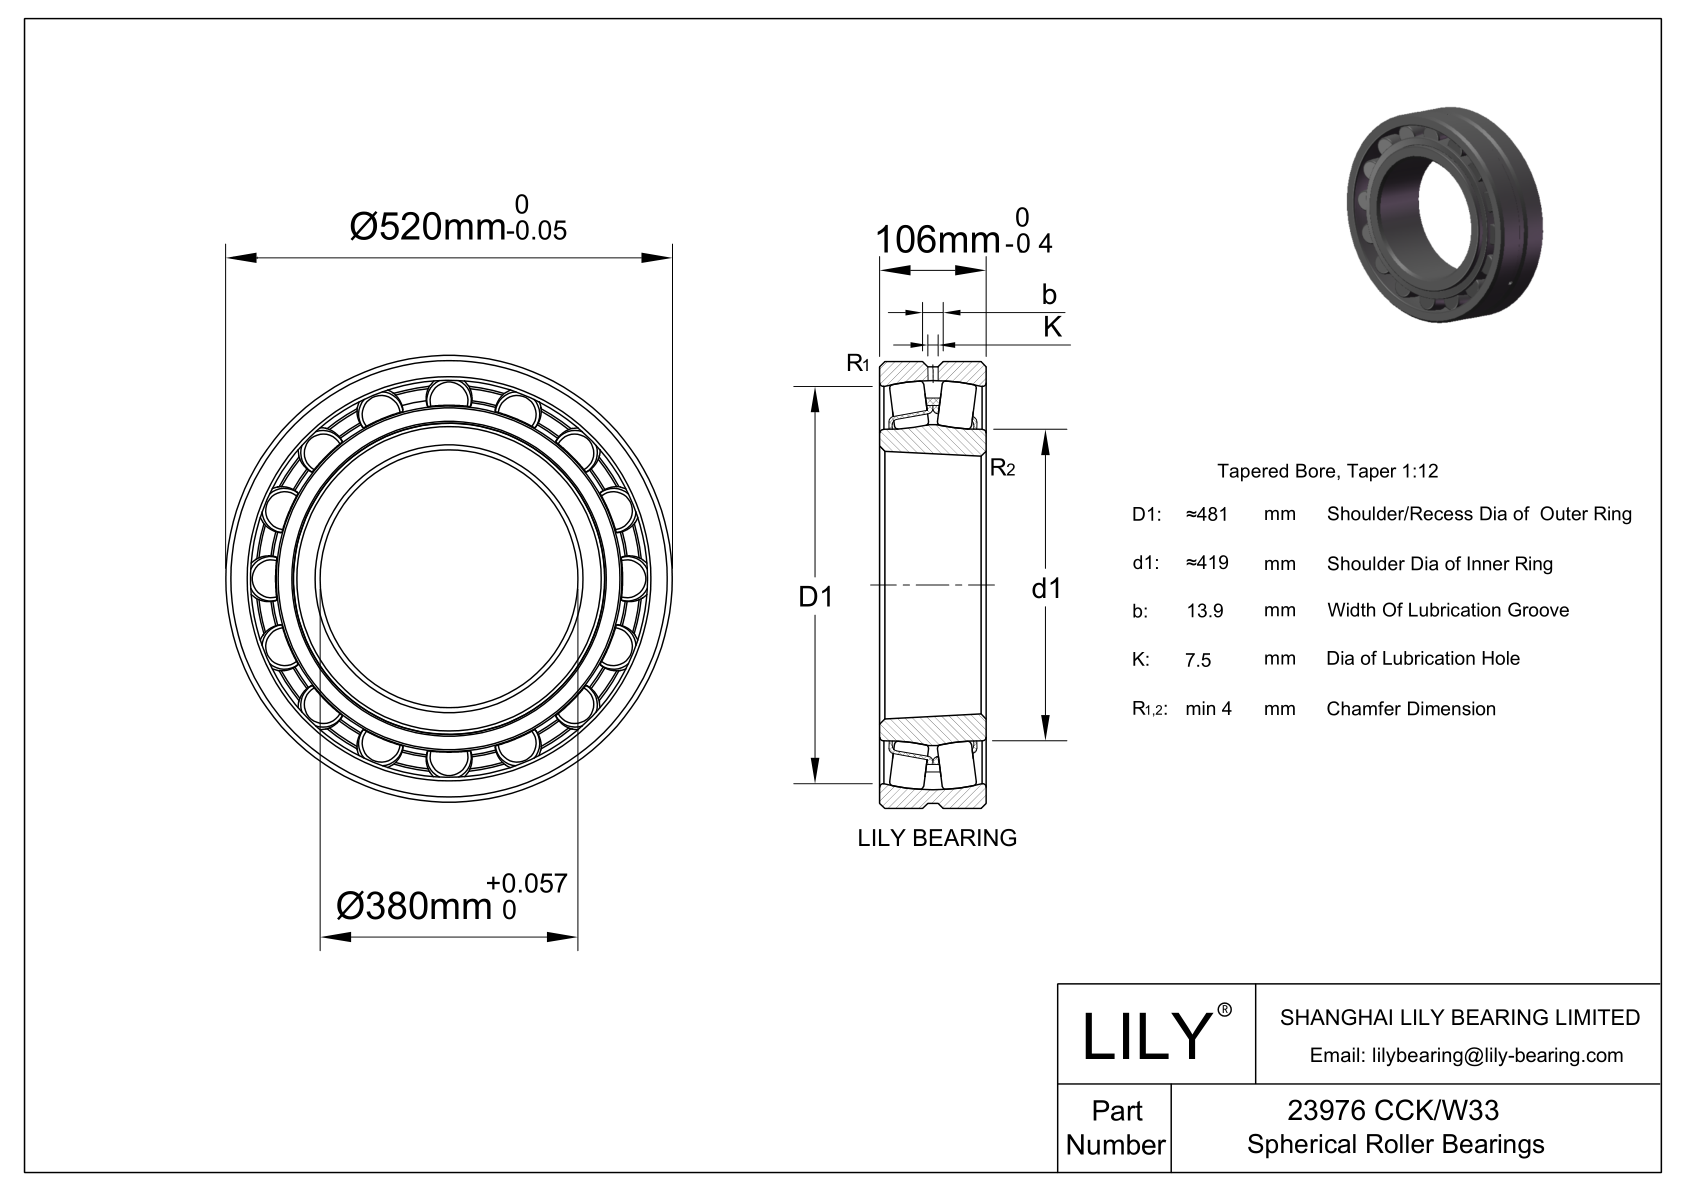 23976 CCK/W33 Double Row Spherical Roller Bearing cad drawing